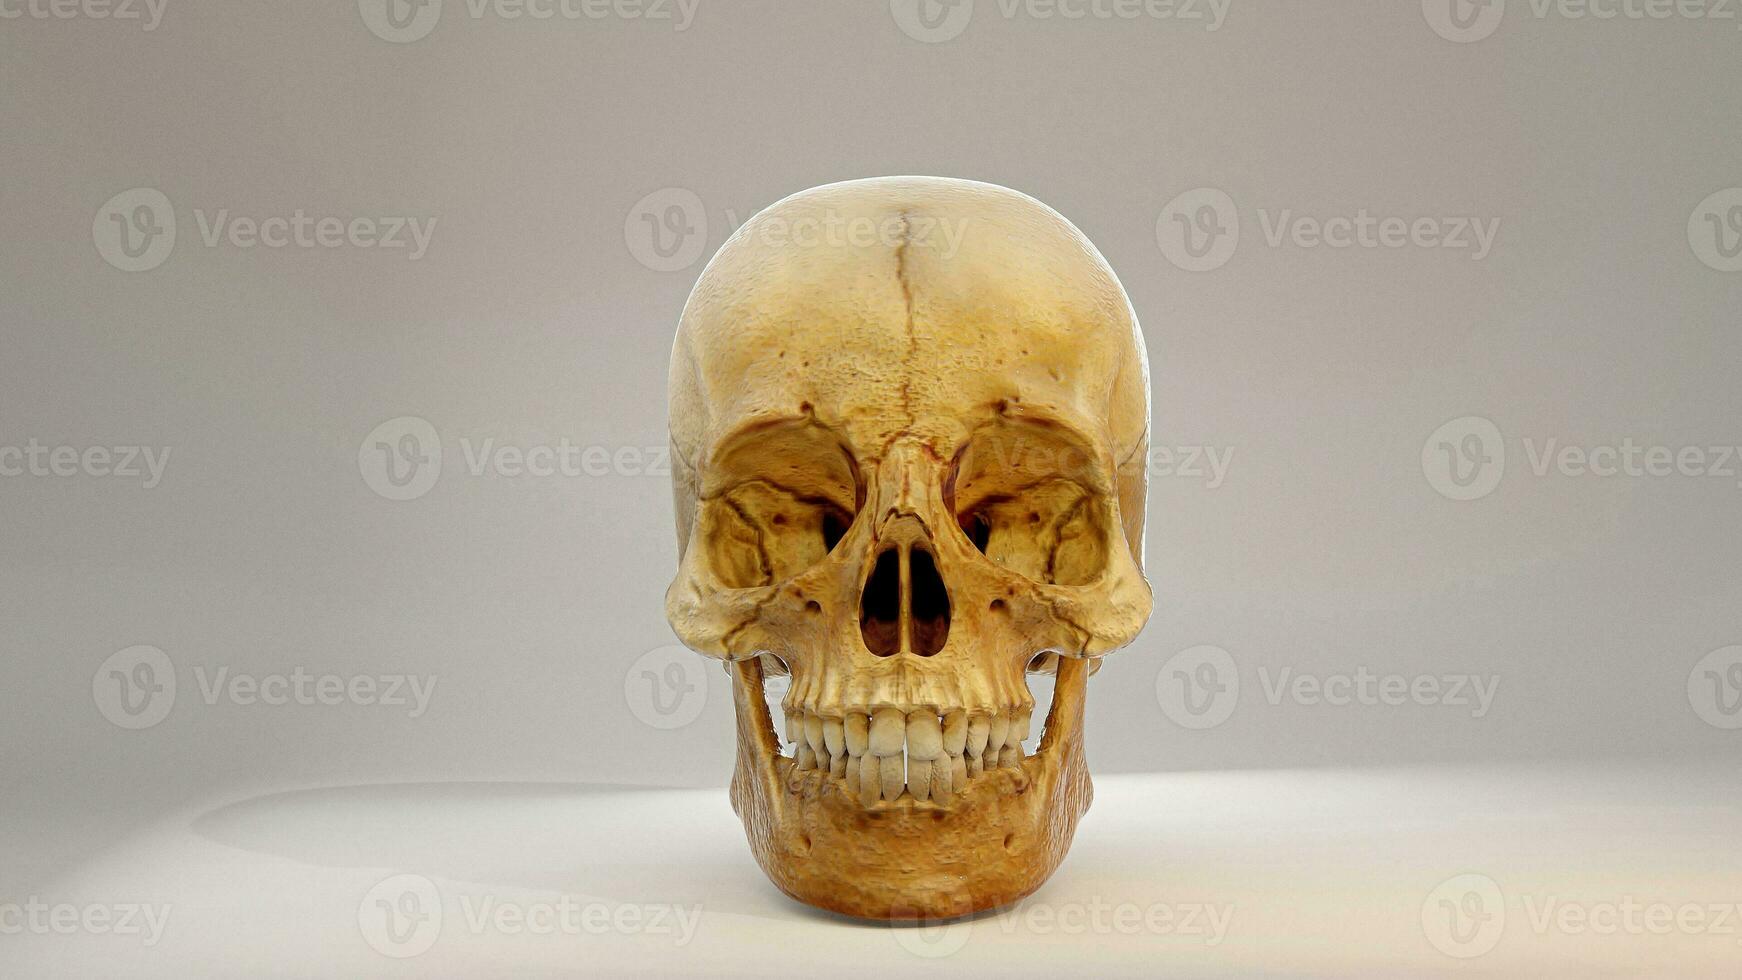 Seks Optimal Fremskynde Real Human Skull 3D image,a three dimensional image of a human skull. front  view 3d rendering image. the skull is isolated on a white background  25232088 Stock Photo at Vecteezy